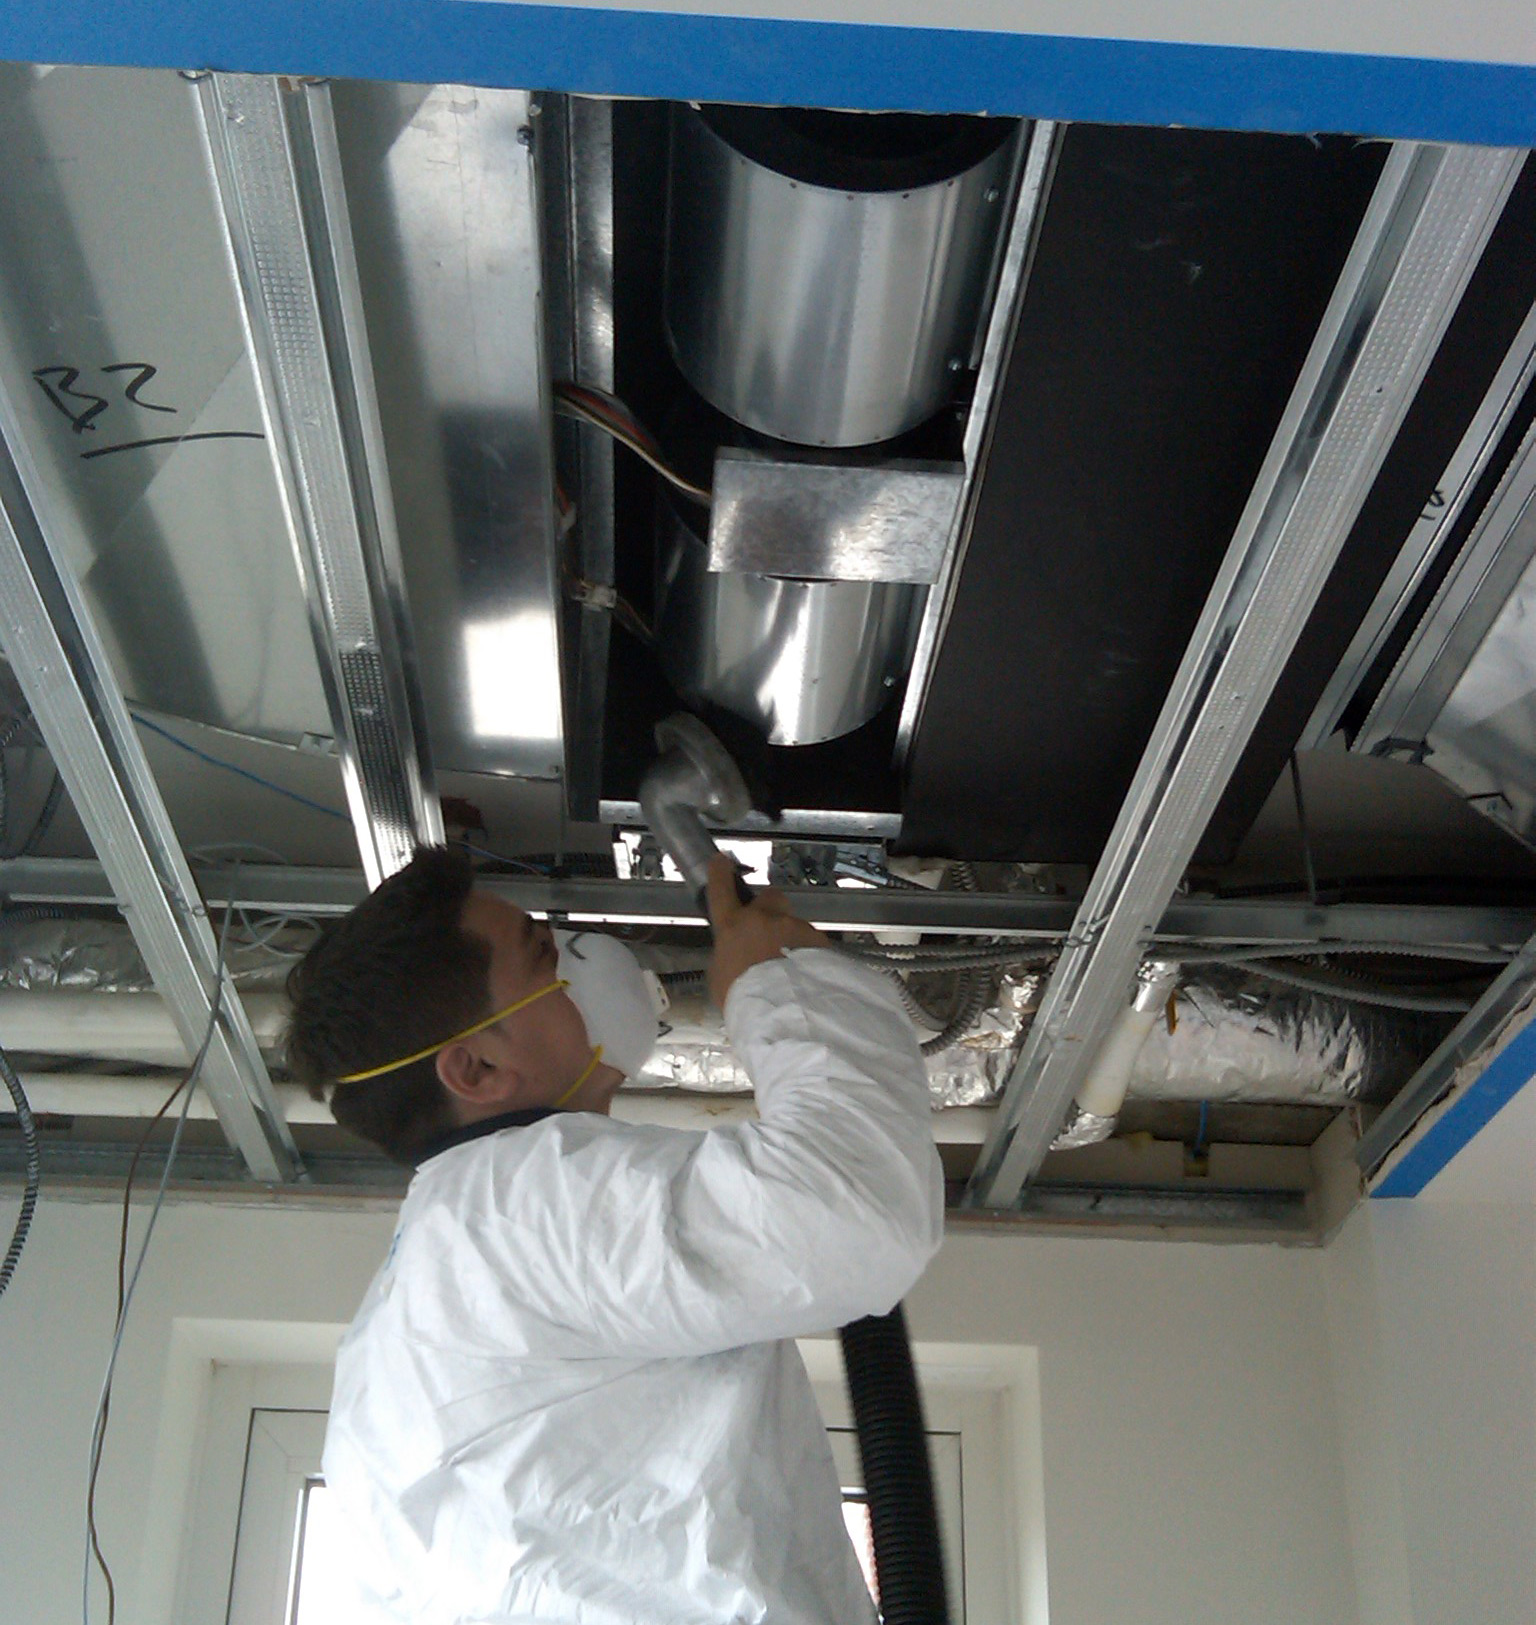 TERS duct cleaning specialist is removing dust and dirt from inside the commercial ductwork